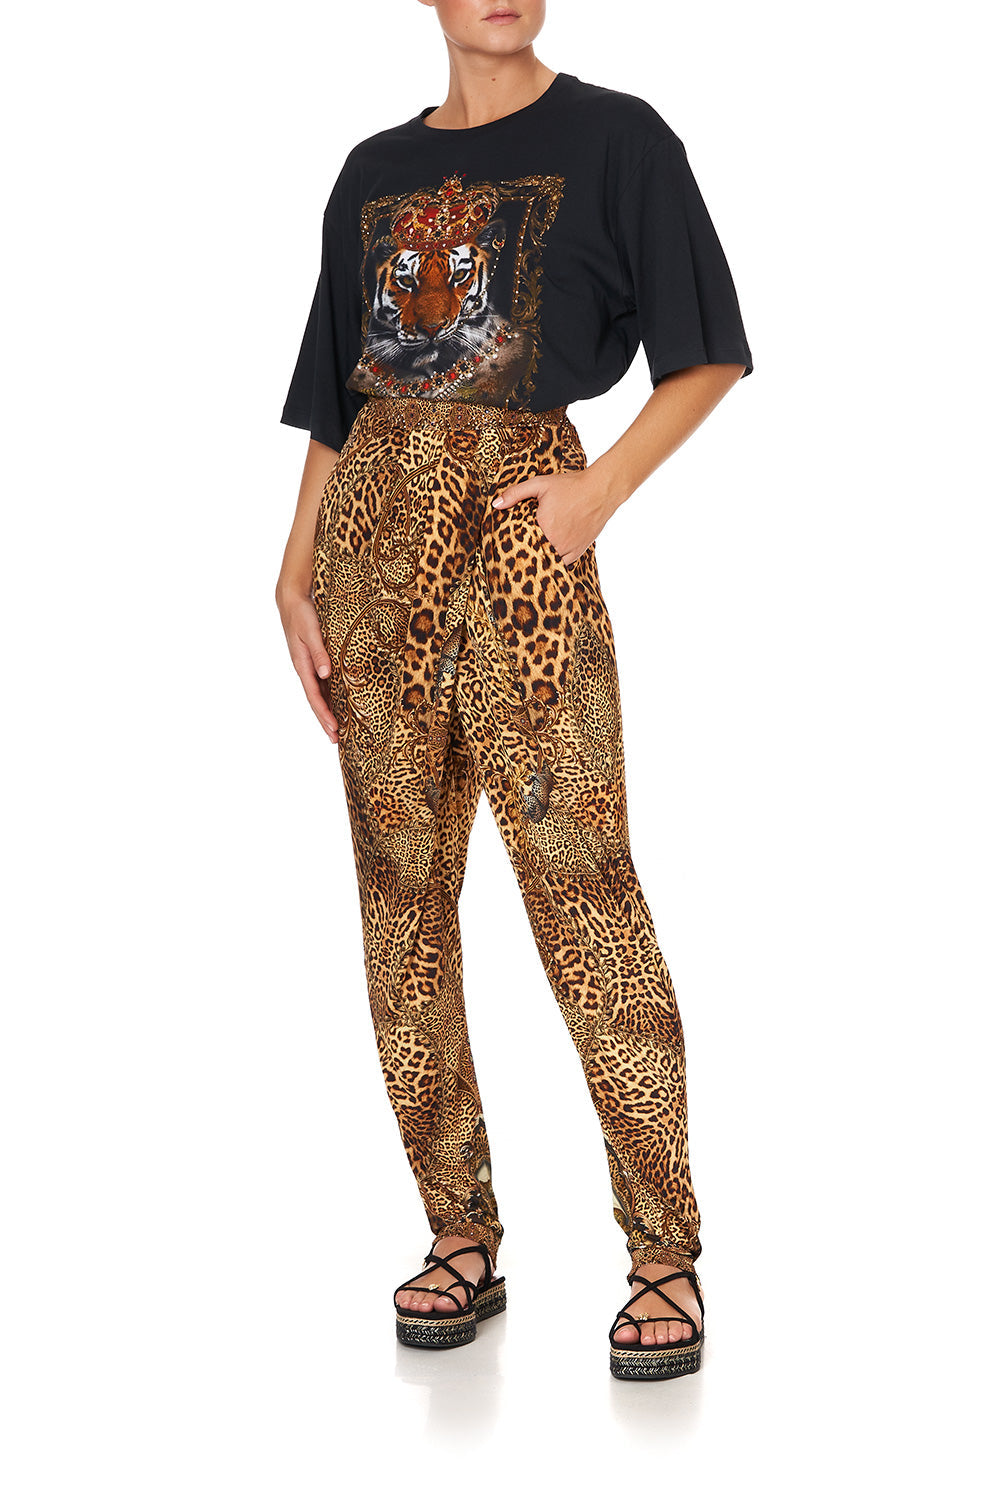 JERSEY DRAPE PANT WITH FRONT CROSSOVER DETAIL LADY LODGE